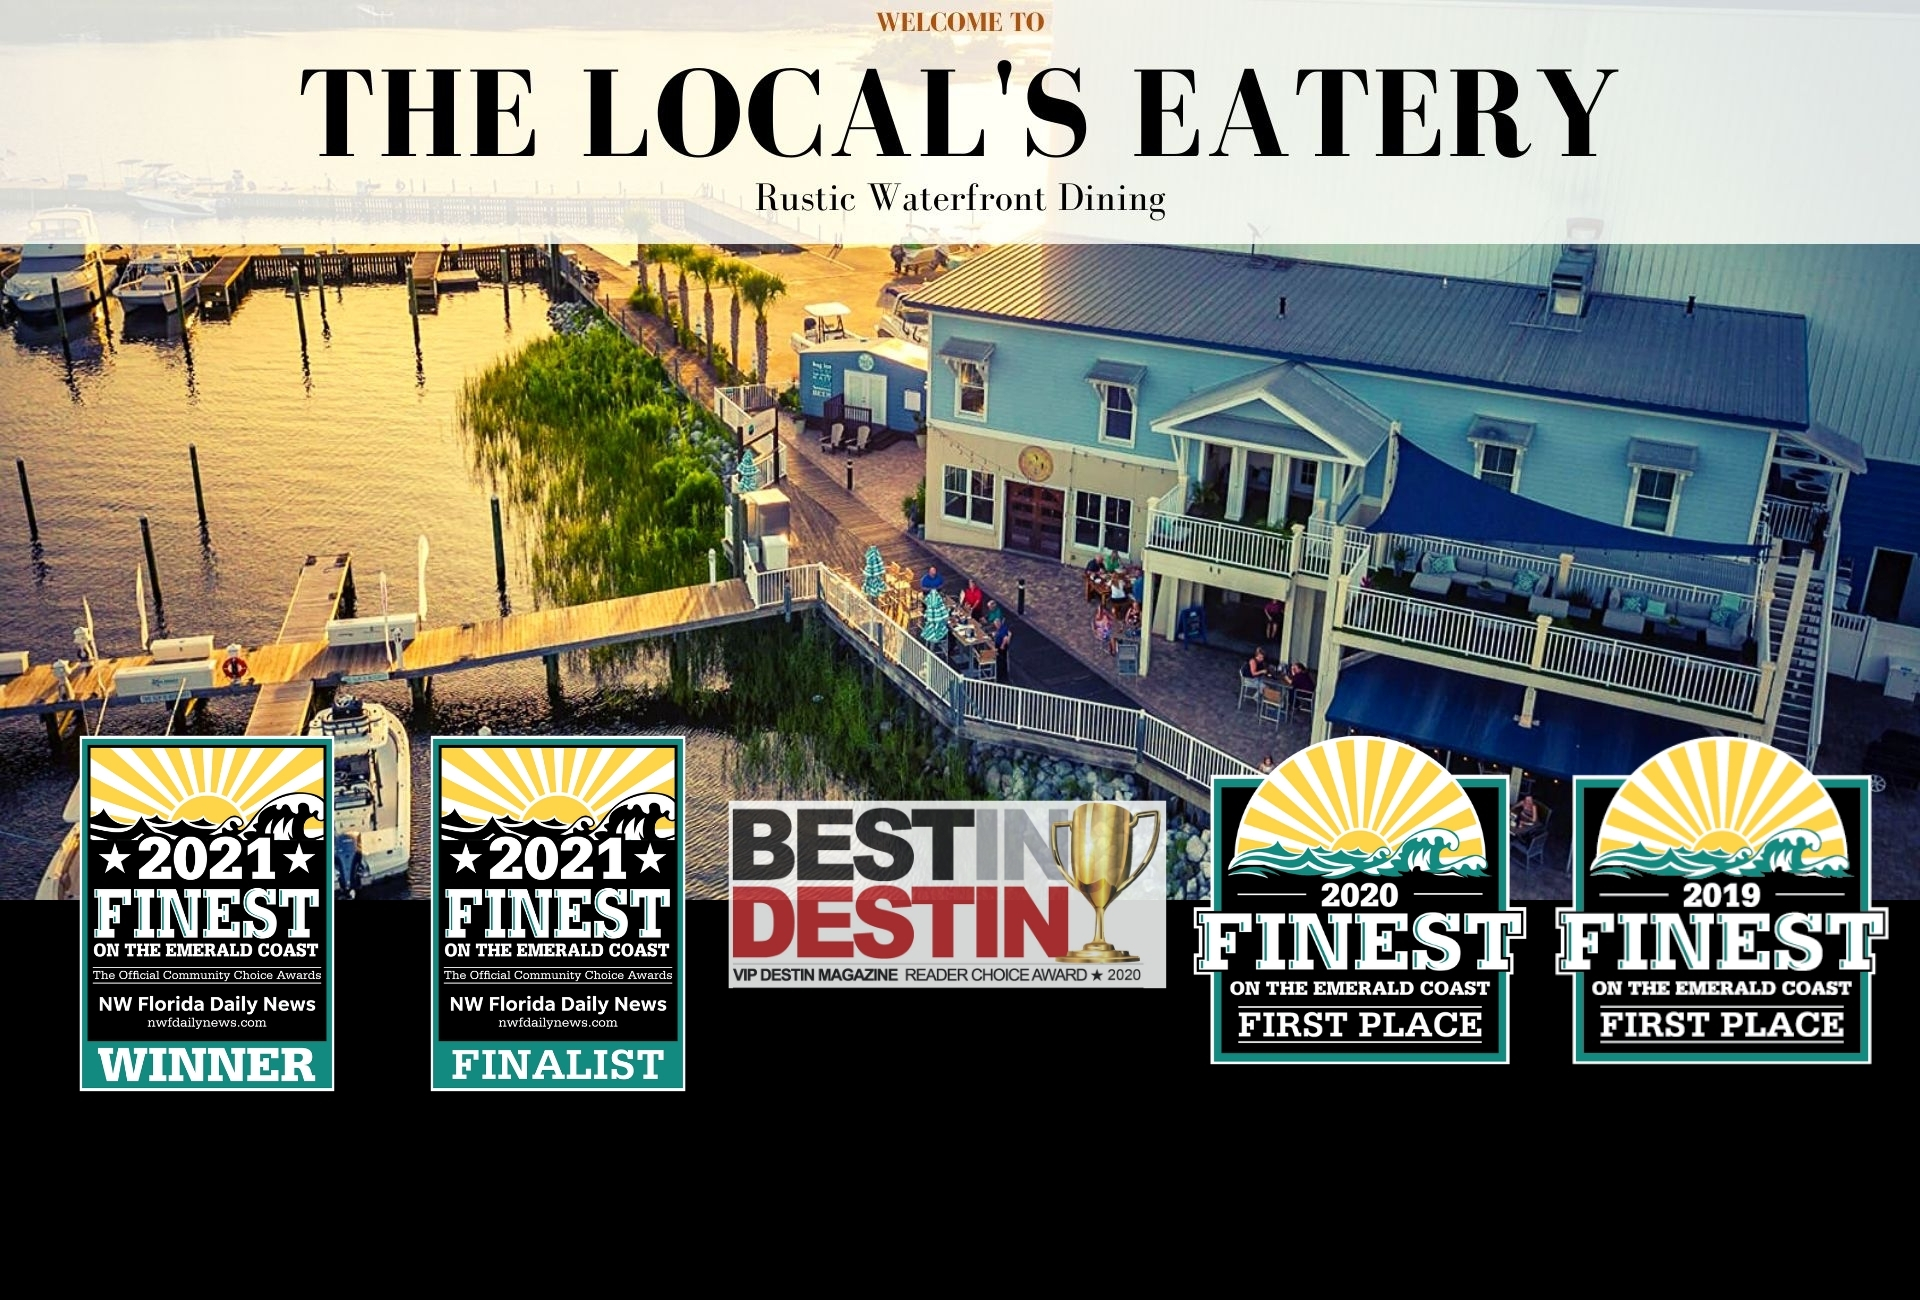 Finest on the Emerald Coast, once again! ⋆ The Local's Eatery